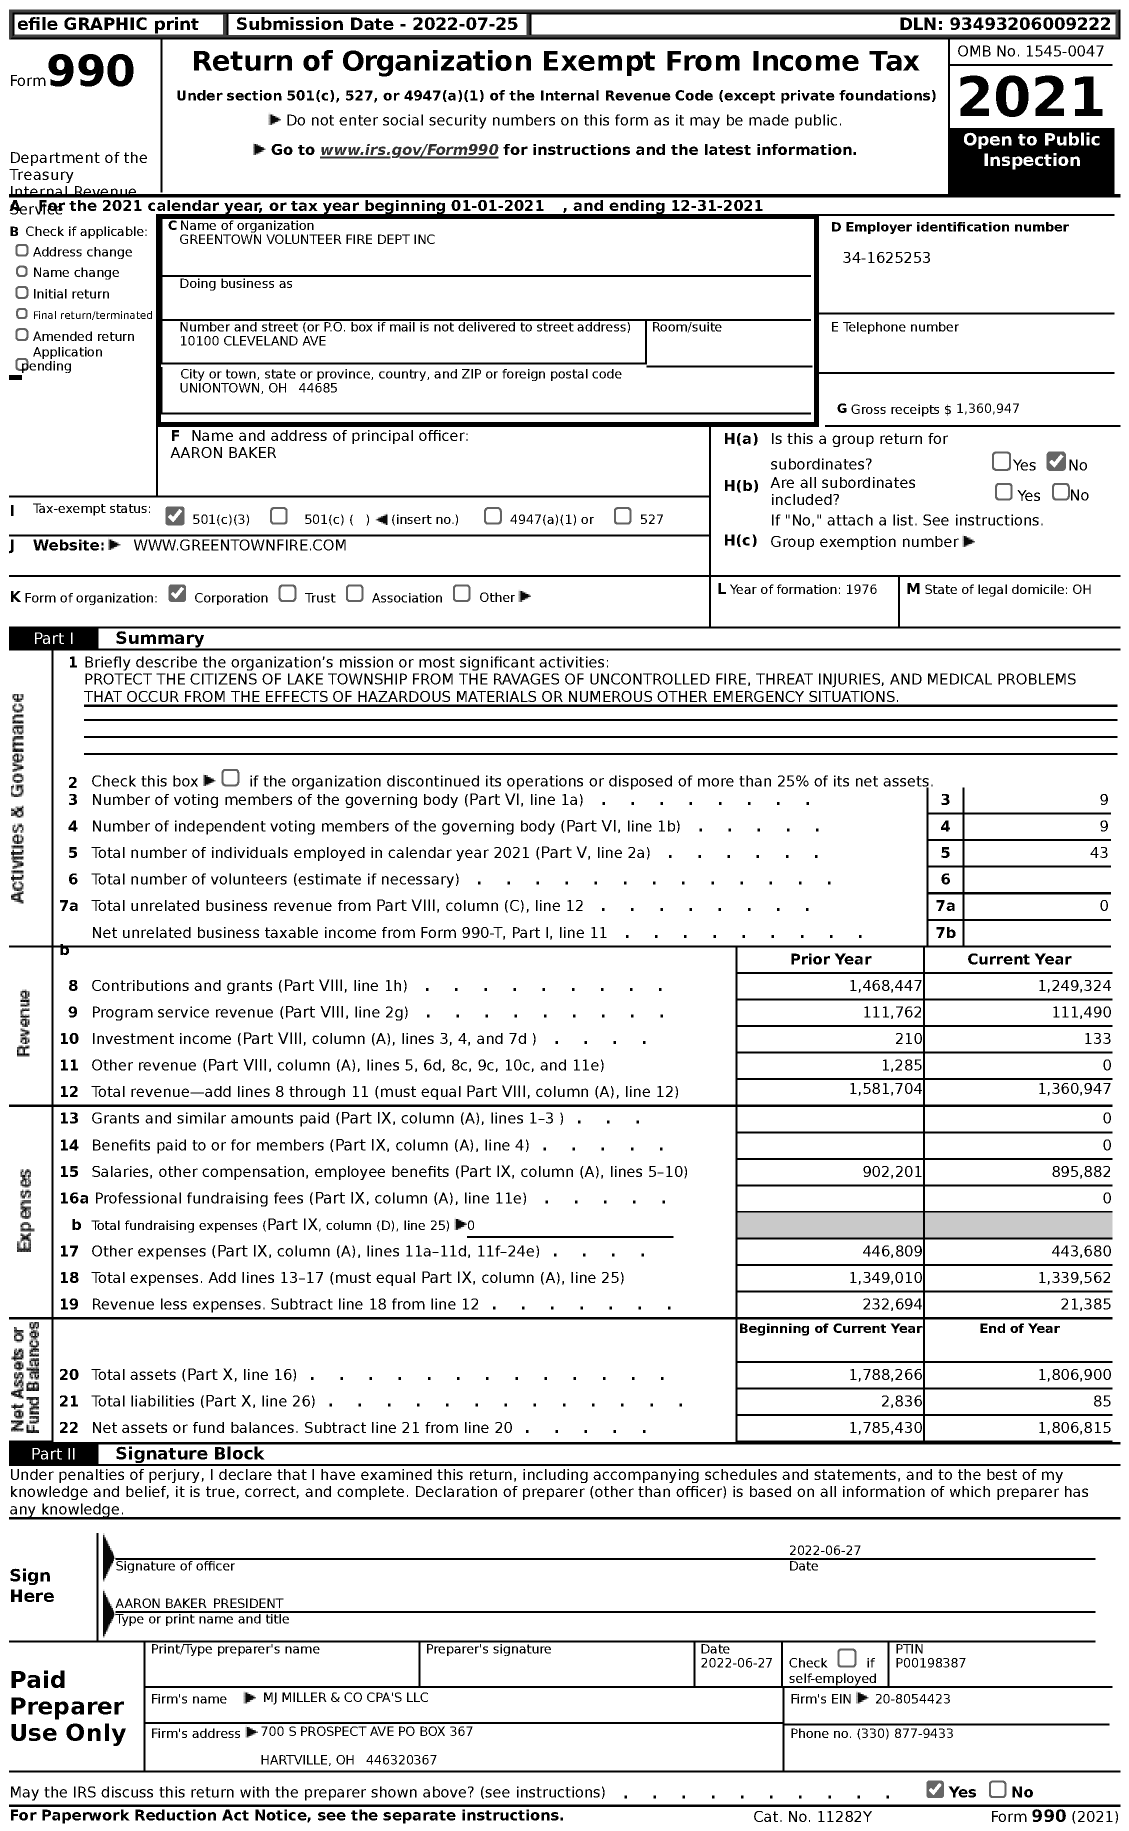 Image of first page of 2021 Form 990 for Greentown Volunteer Fire Dept